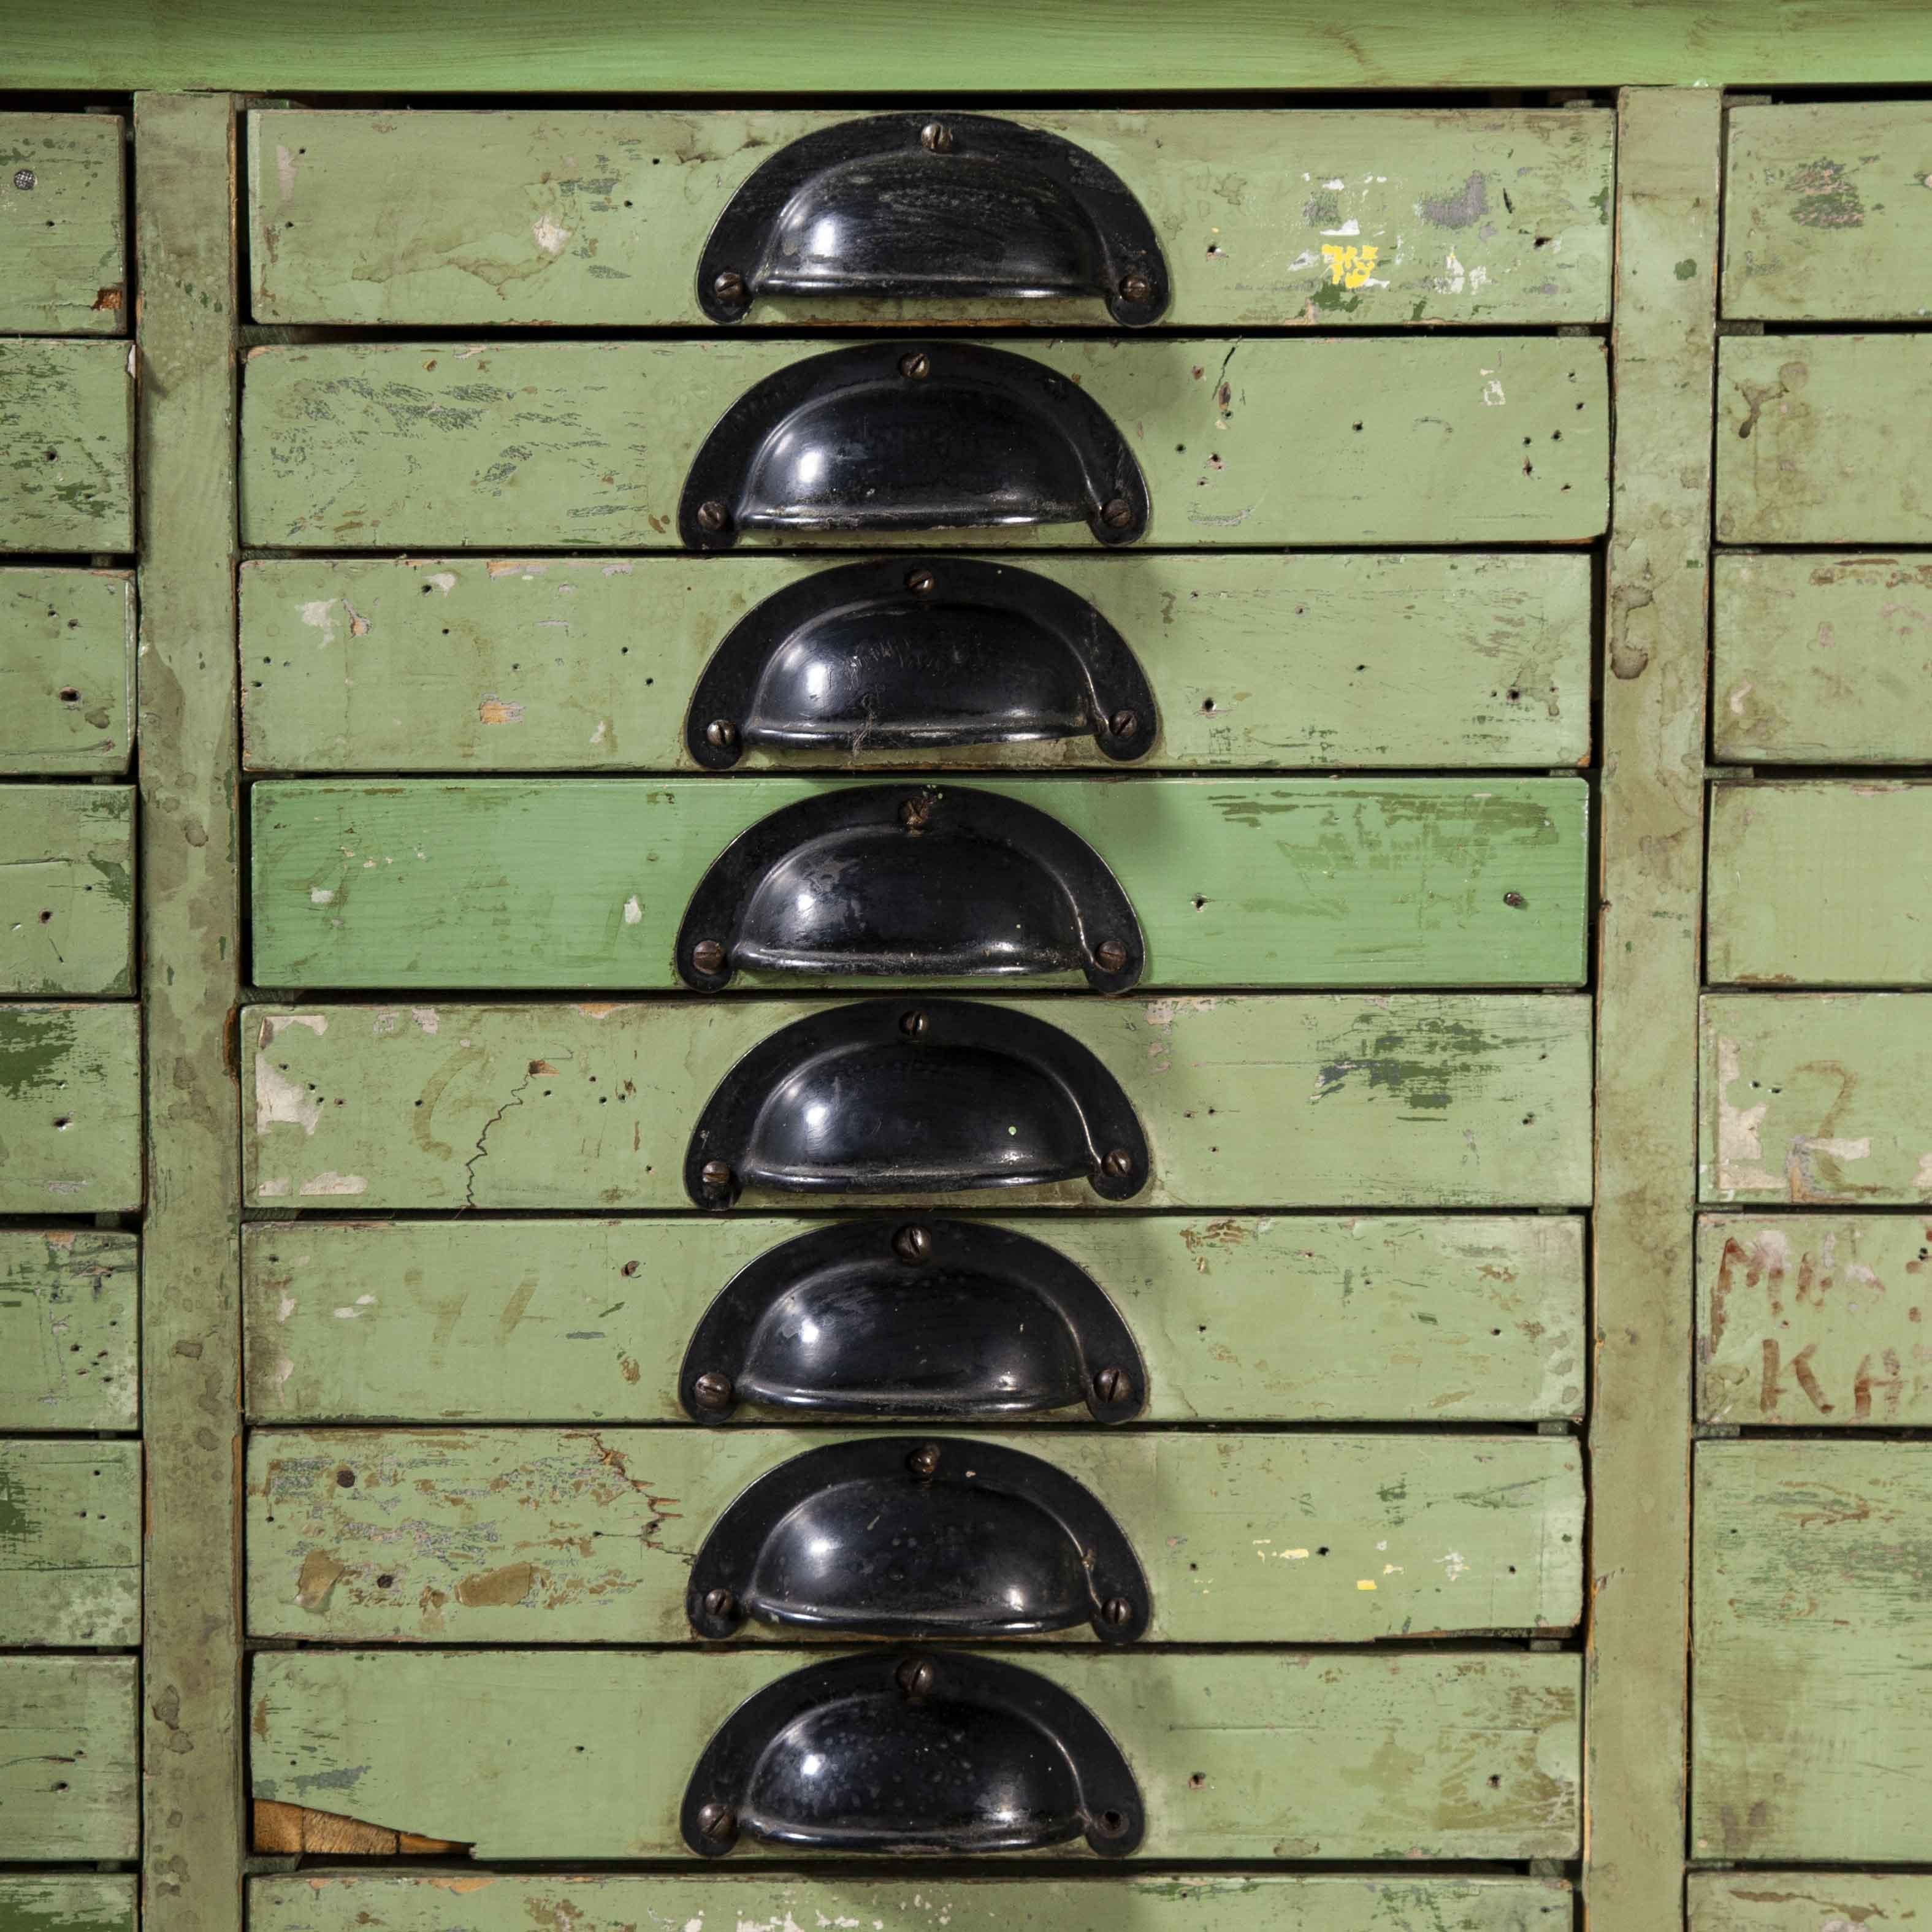 1950’s French original workshop multi drawer cabinet – Industrial Green

1950’s French original workshop multi drawer cabinet – Industrial Green. One of our favourite finds, we sourced this cabinet in Lille where it was hiding in the back of a